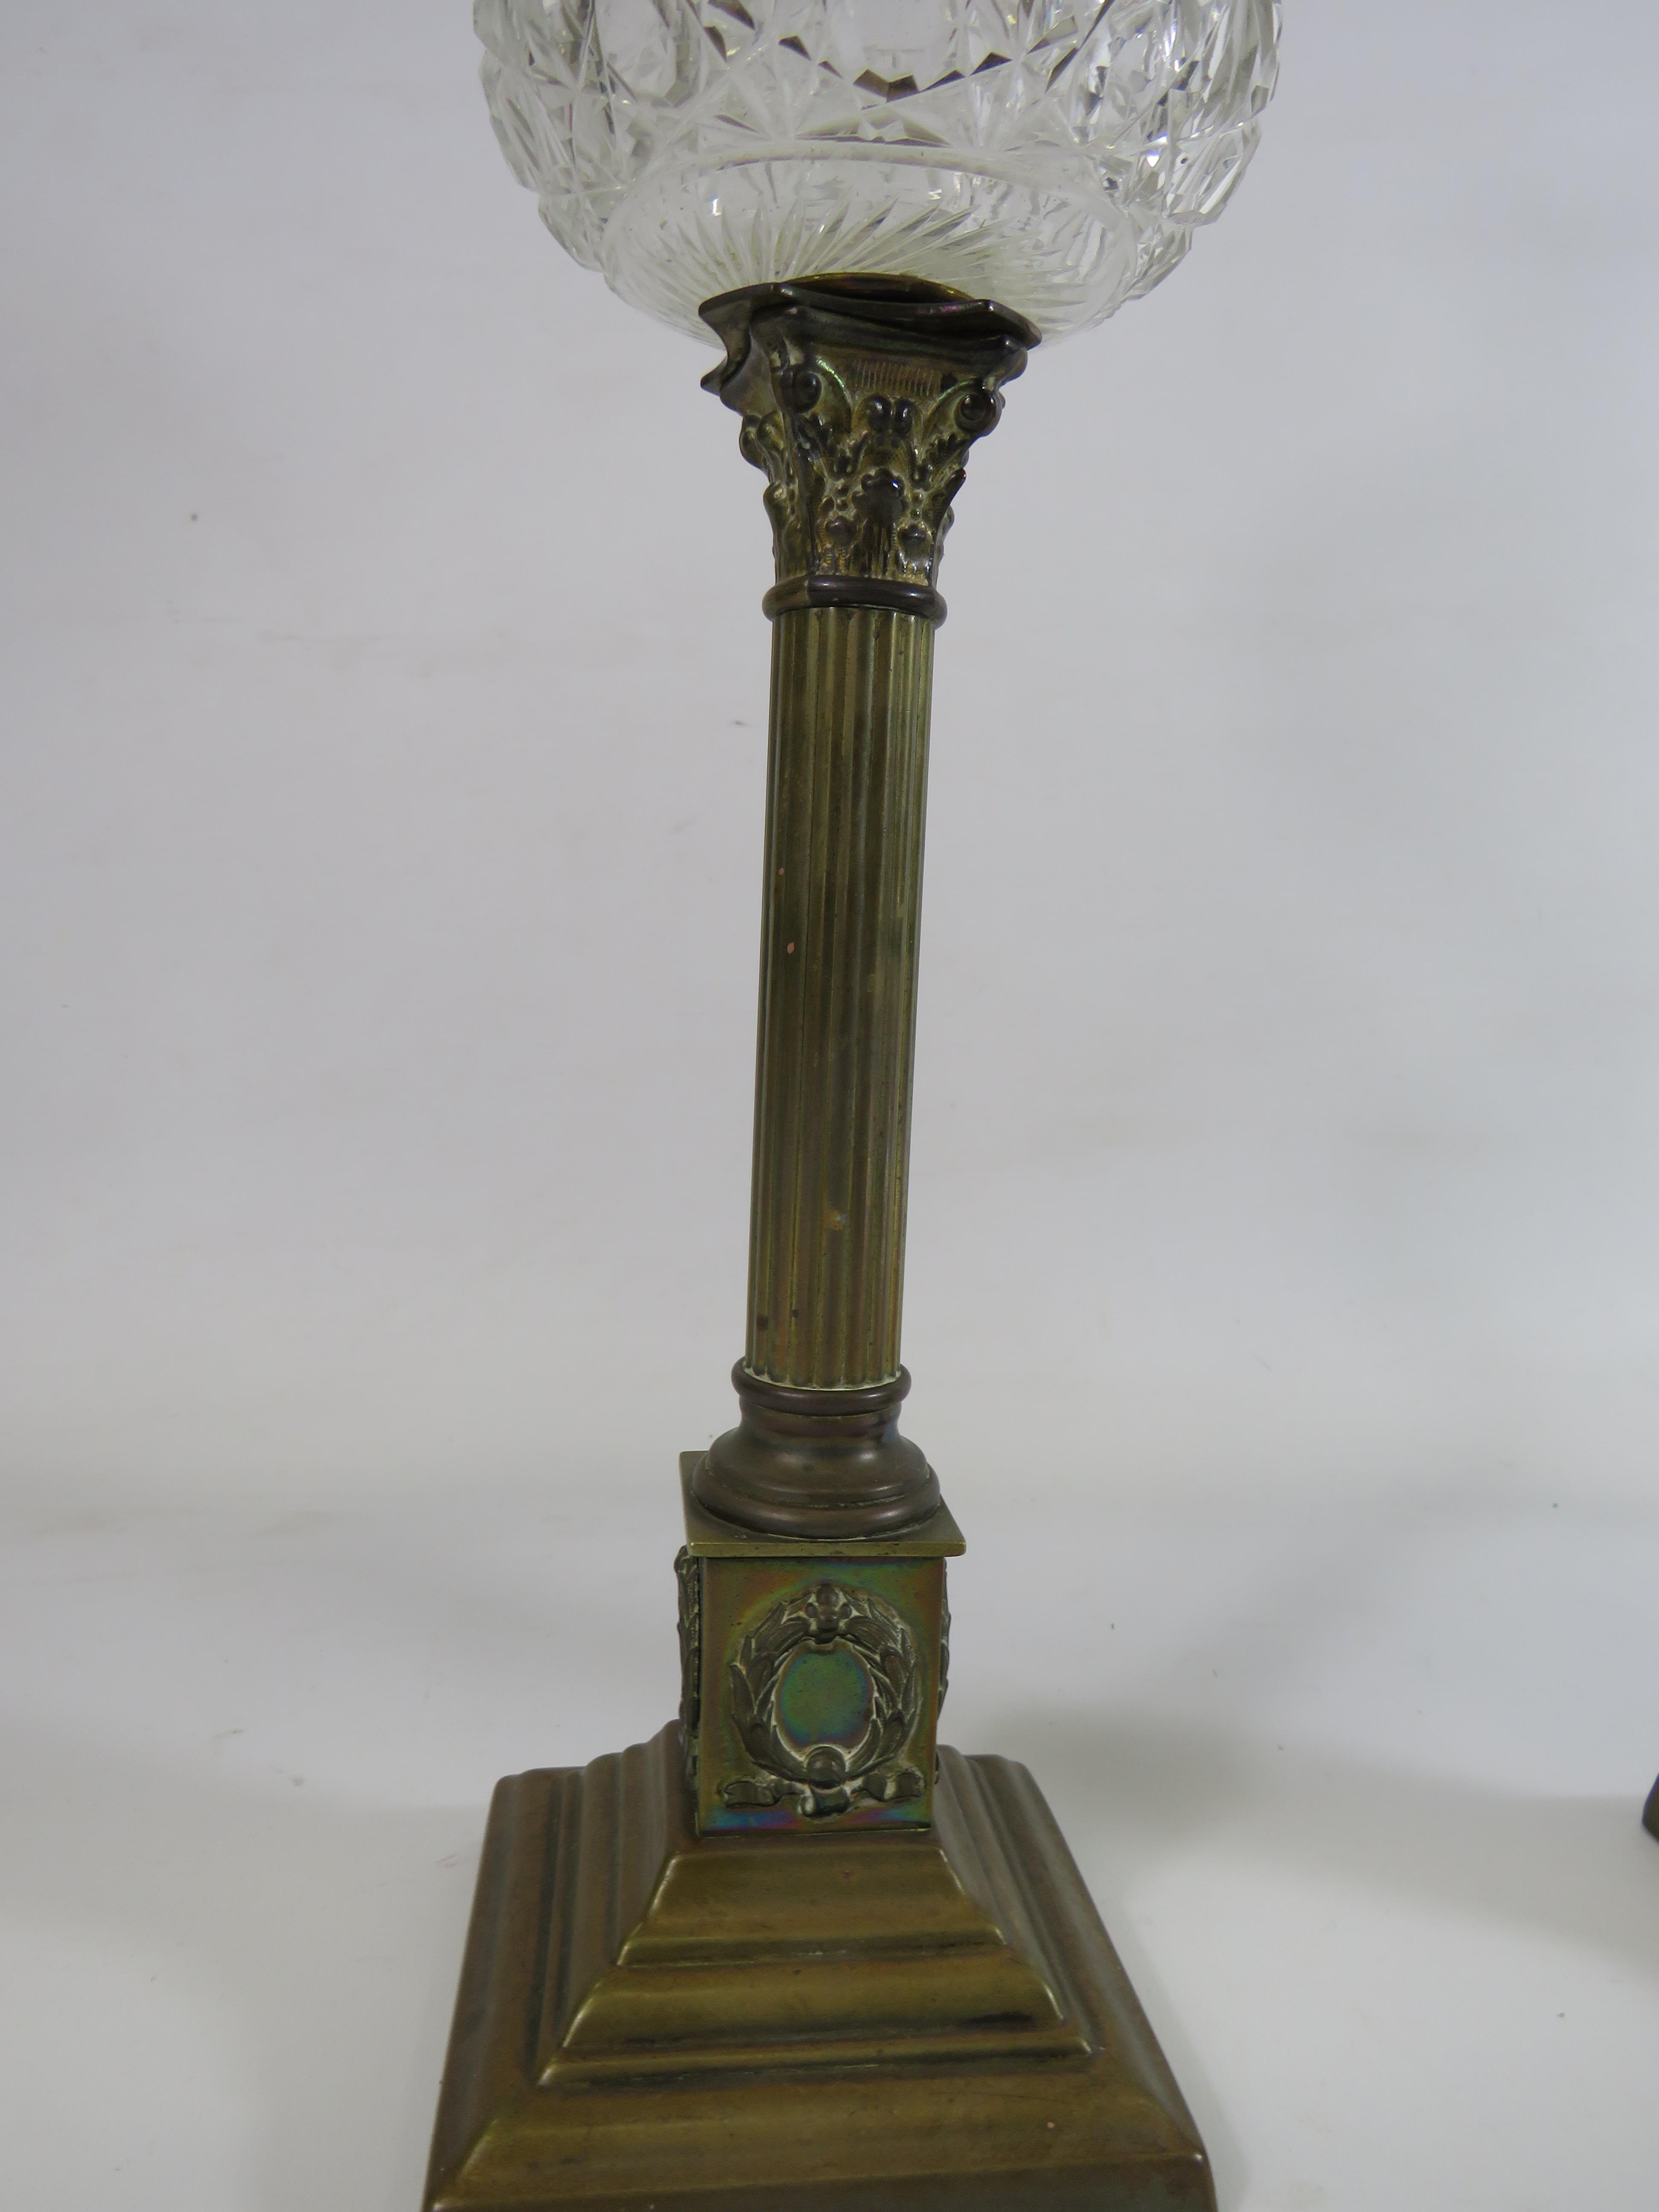 Two vintage brass oil lamps with column bases and crystal glass reserve, approx 21" tall. - Image 2 of 4